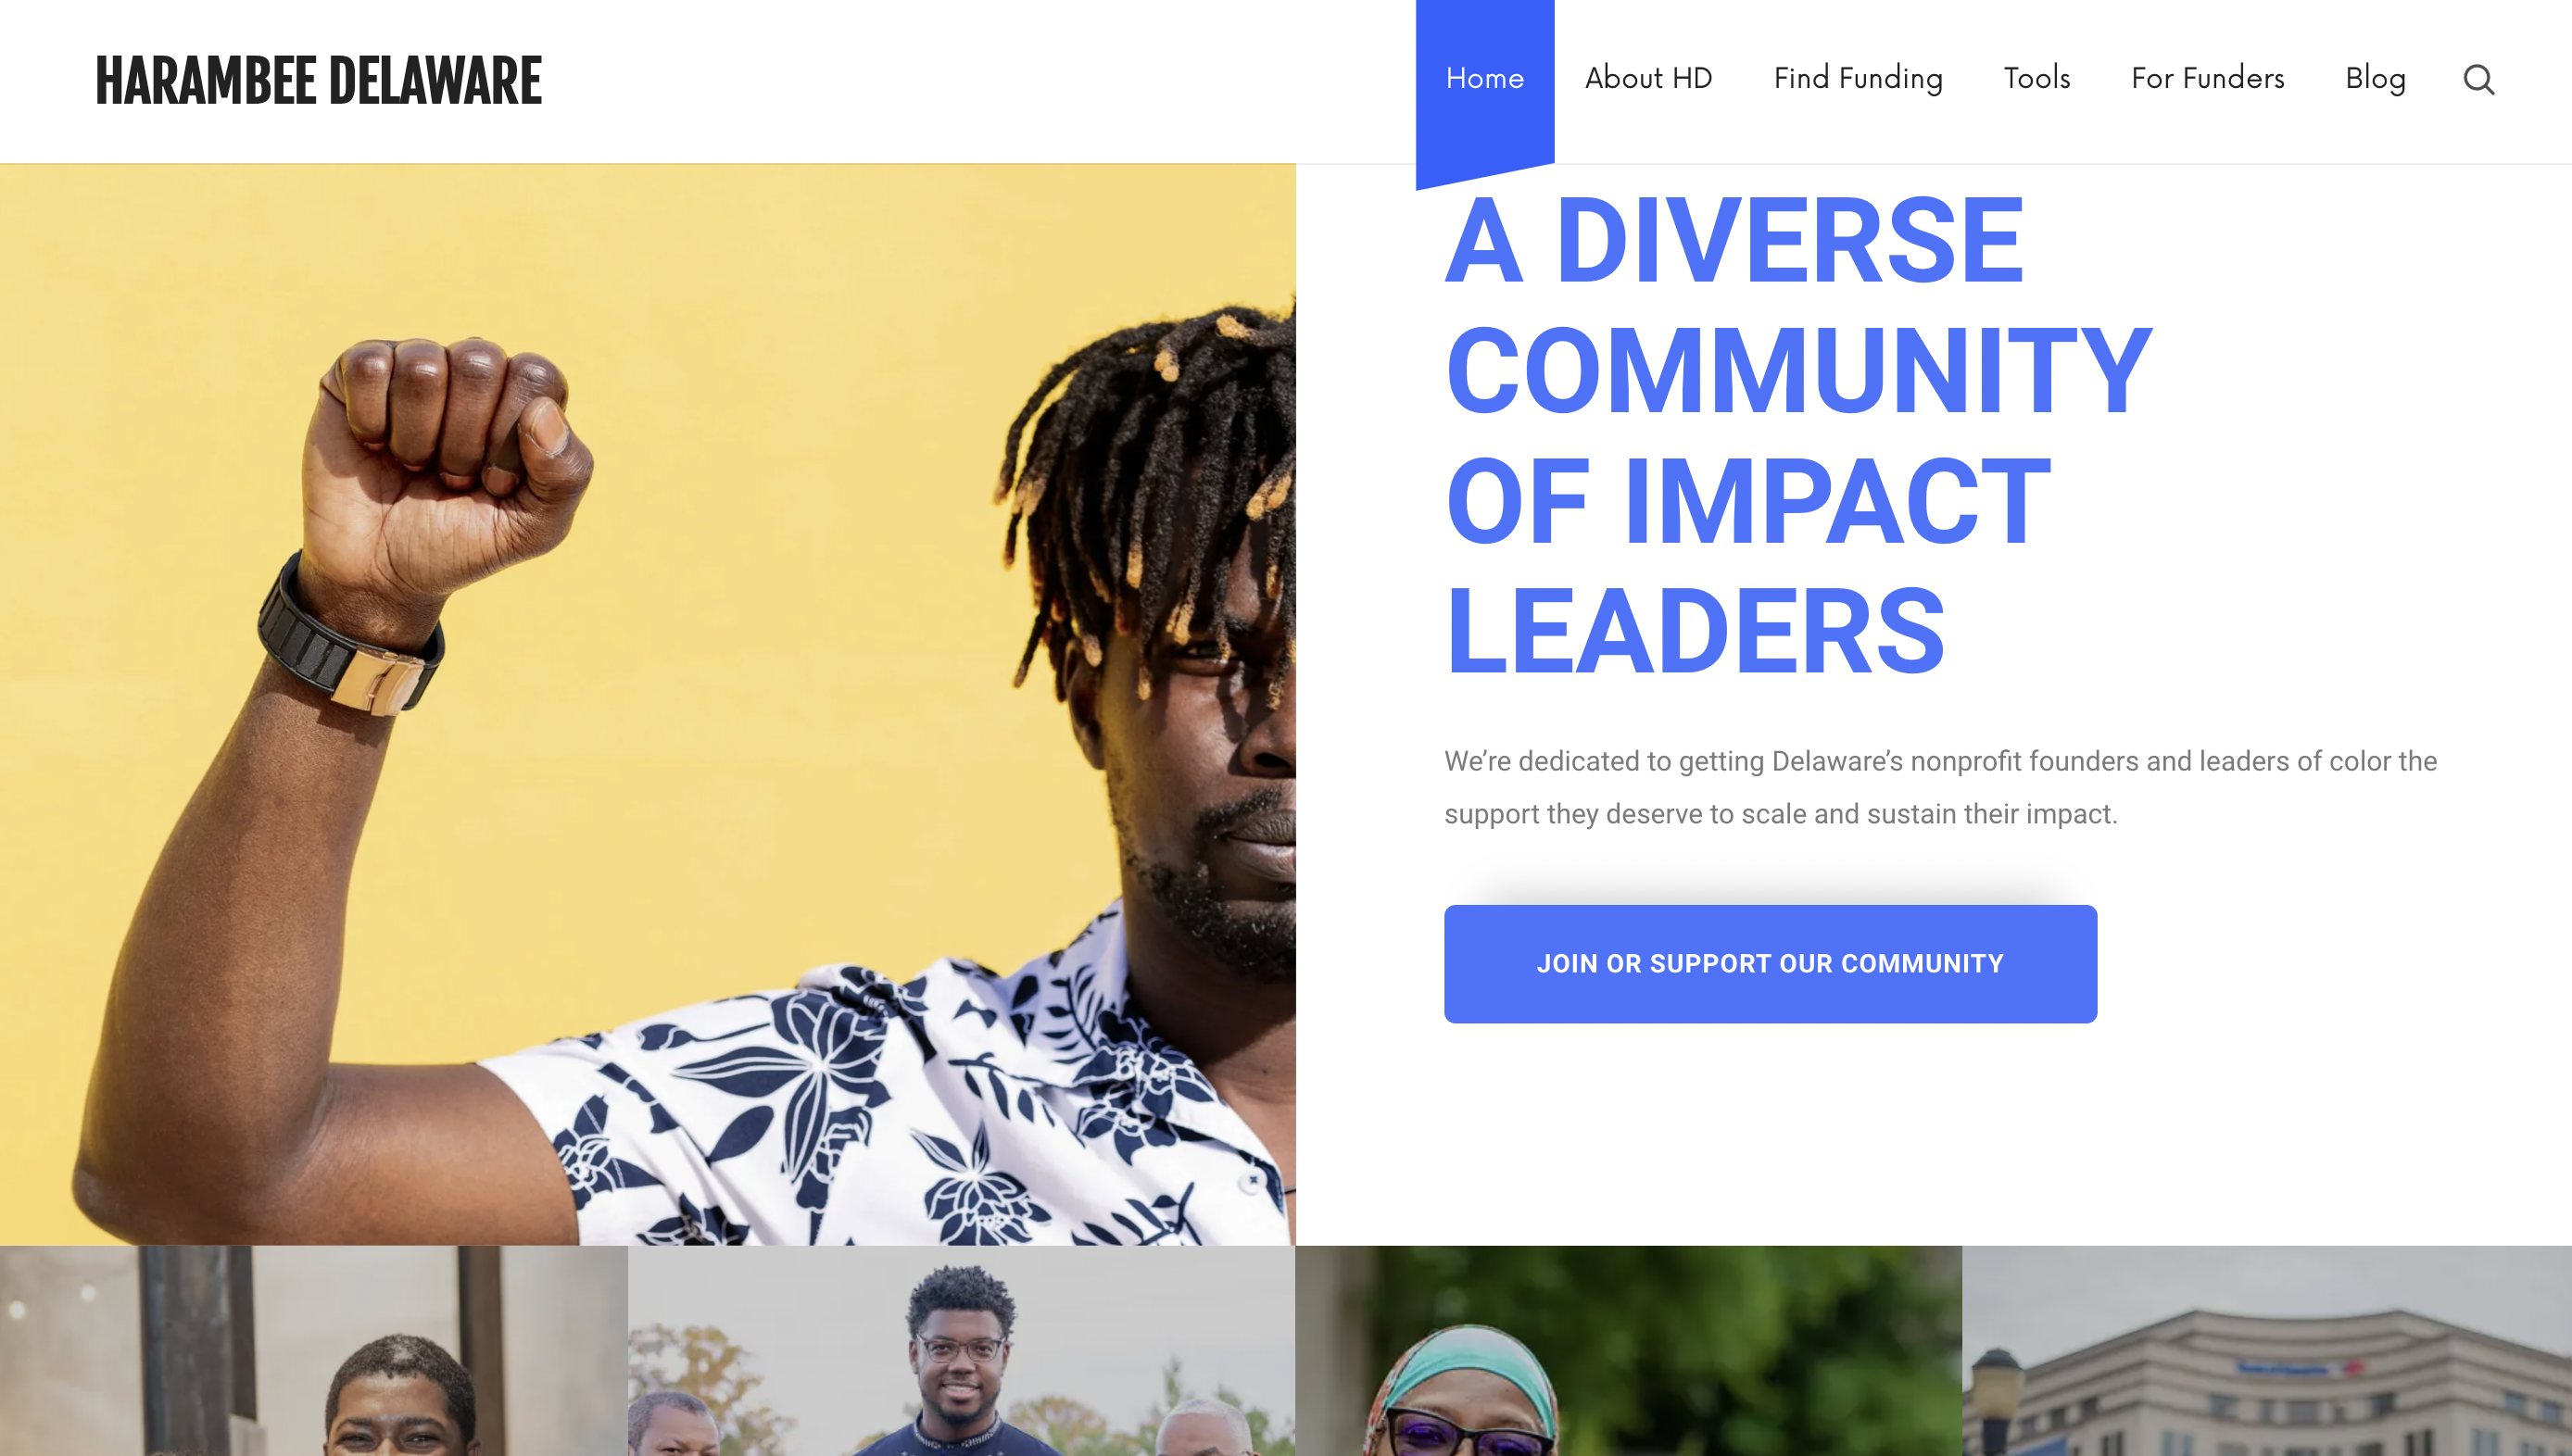 New website and program launch to connect and support nonprofit founders and leaders of color in Delaware